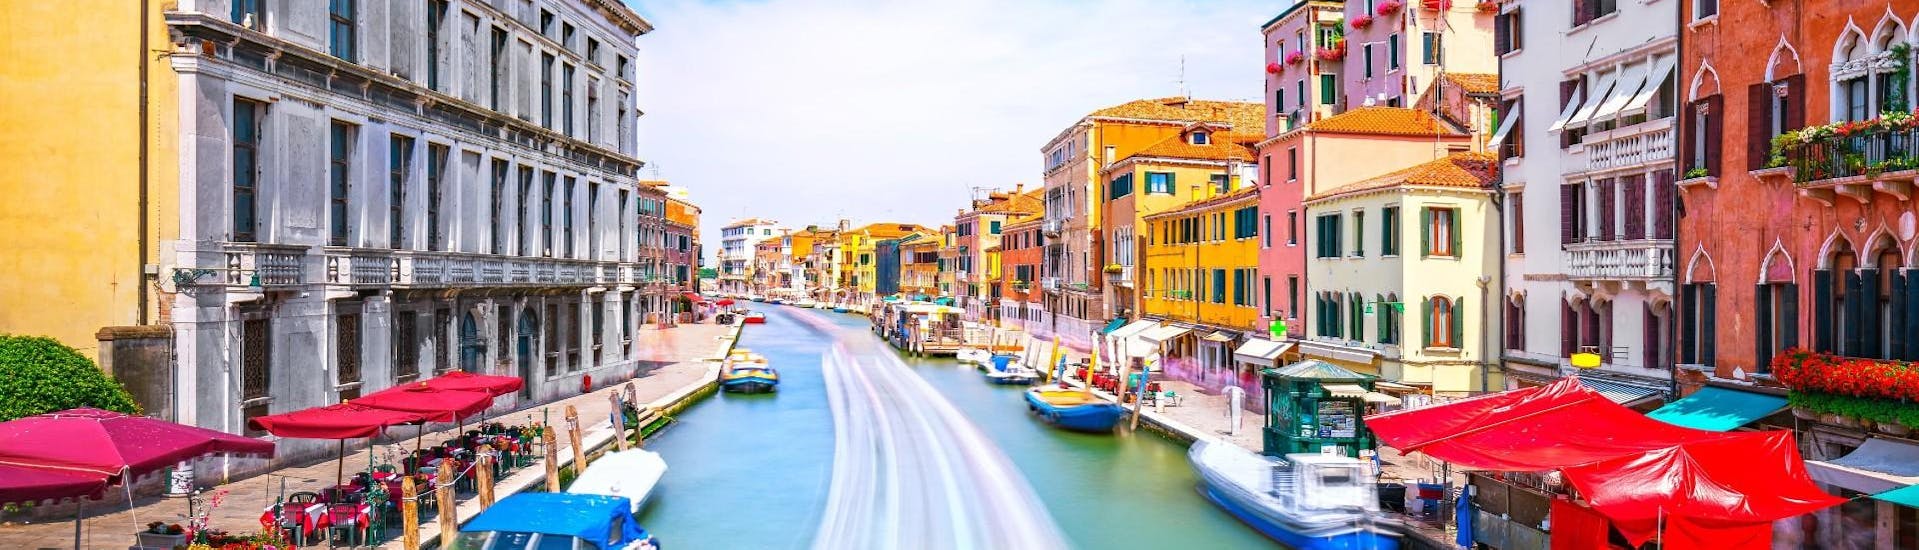 boat-trip-through-venice-hidden-canals-and-grand-canal-avventure-bellissime